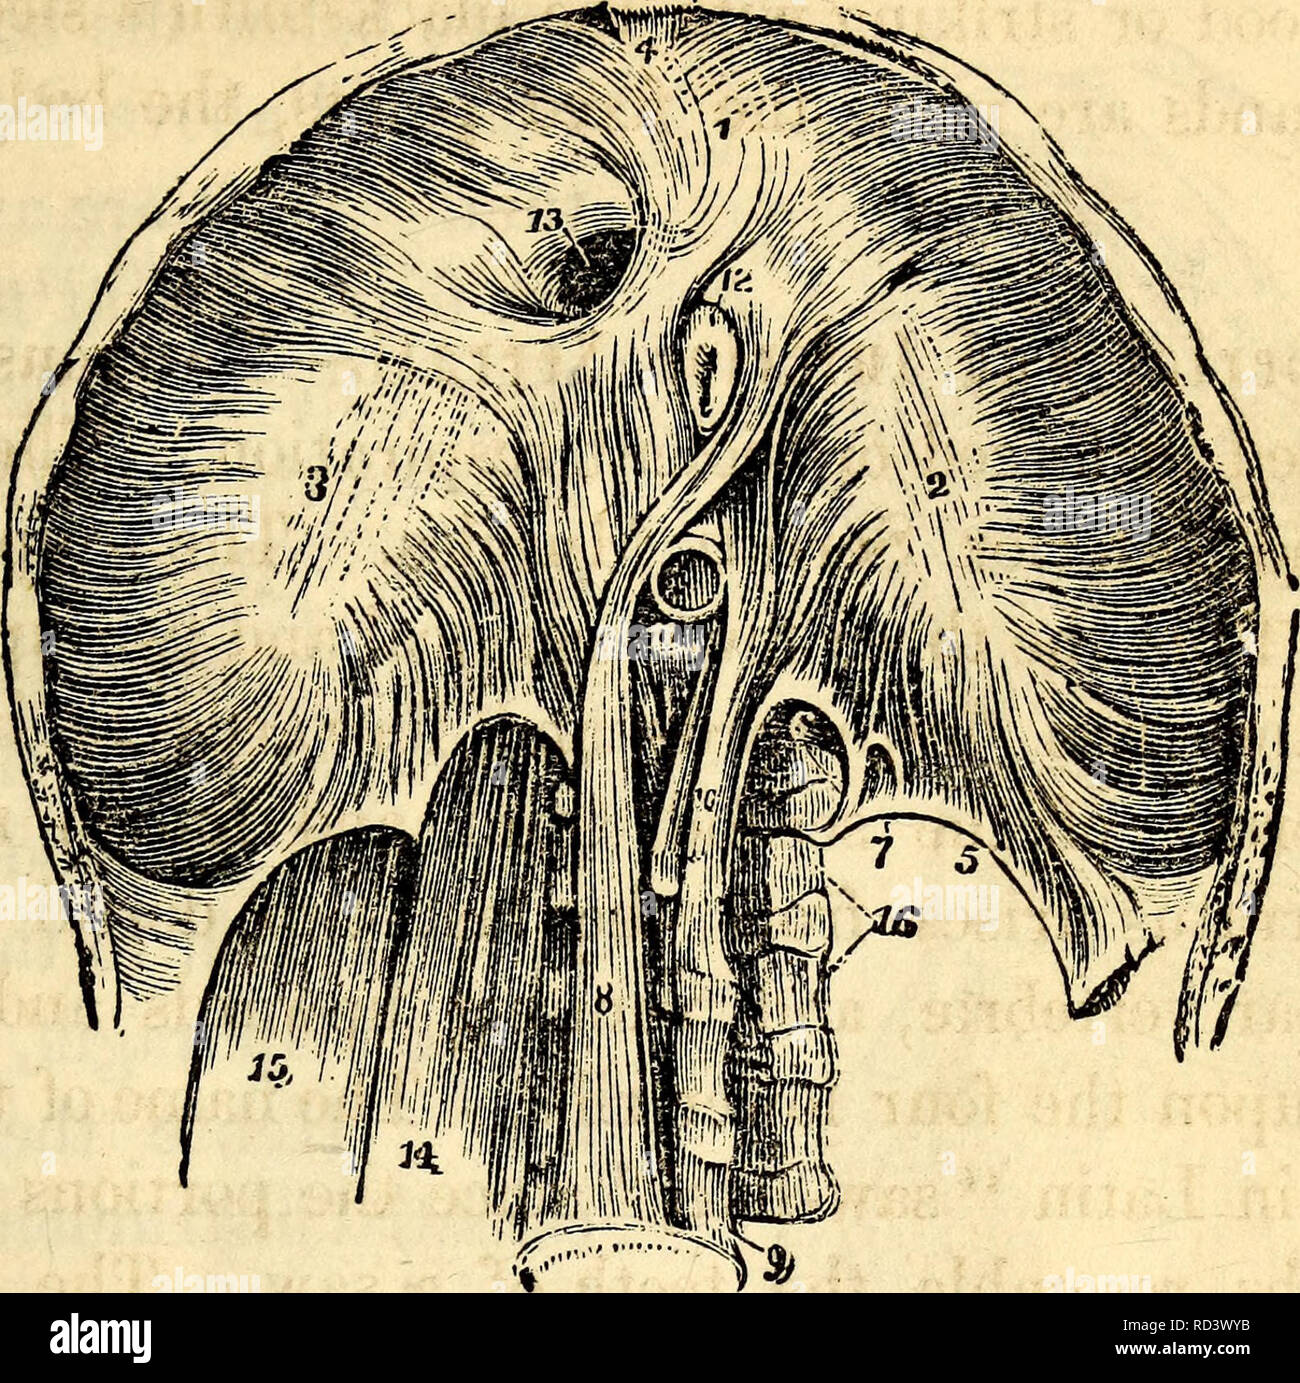 . Elementary anatomy and physiology : for colleges, academies, and other schools. Anatomy; Physiology. AND PHYSIOLOGY. 125. A View of the Under Side of the Diaphragm. 1, 2, 3, The Greater Muscle of the Dia- phragm inserted into the Cordiform Tendon. 4, The small triangular space behind the Sternum, covered only by Serous Membrane, and through which Hernia sometimes pass. 5, Ligamentum Arcuatum of the Left Side. 6, Point of Origin of the Psoas Mag- nus. 7, A small Opening for the Lesser Splanchnic Nerve. 8, One of the Crura of the Diaphragm. 9, Fourth Lumbar Yertebra. 10, Another Cms or portion Stock Photo